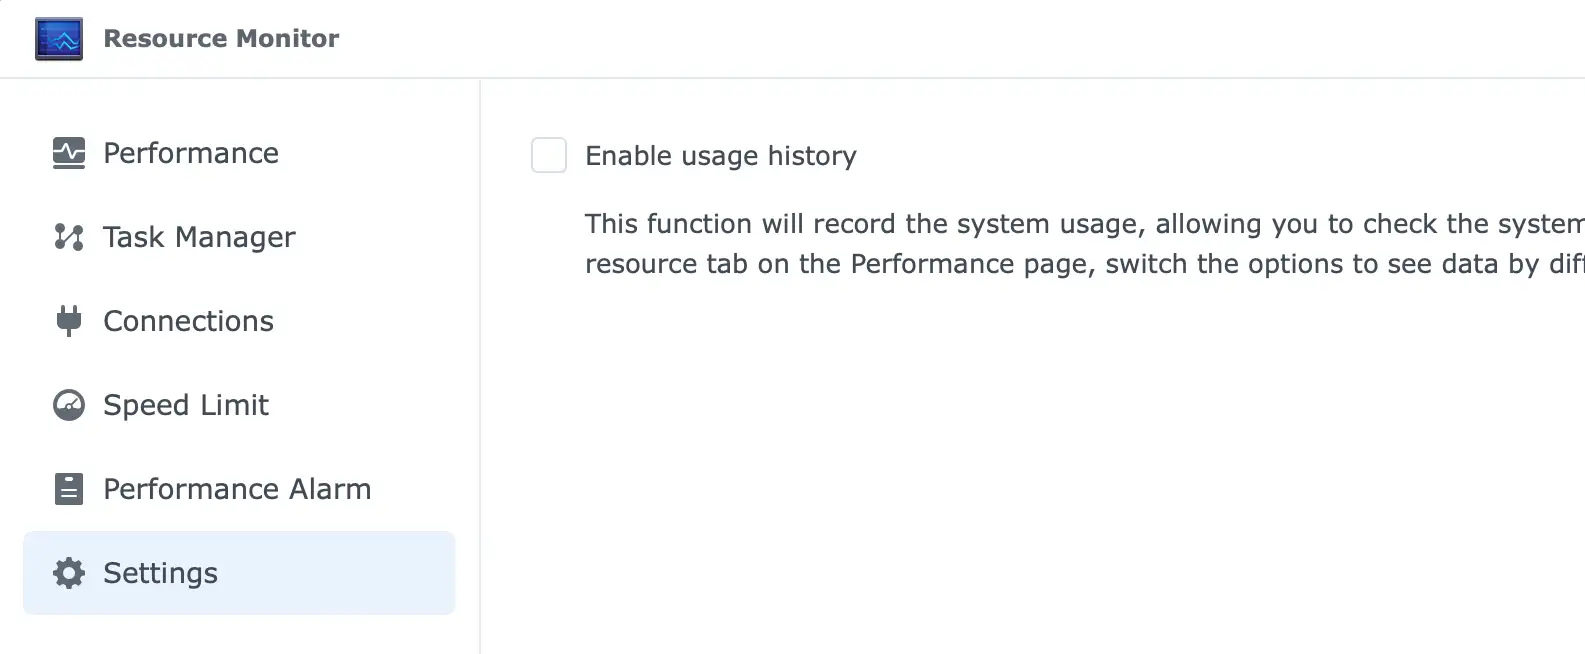 Ressource Monitor settings displaying the unchecked Enable usage history